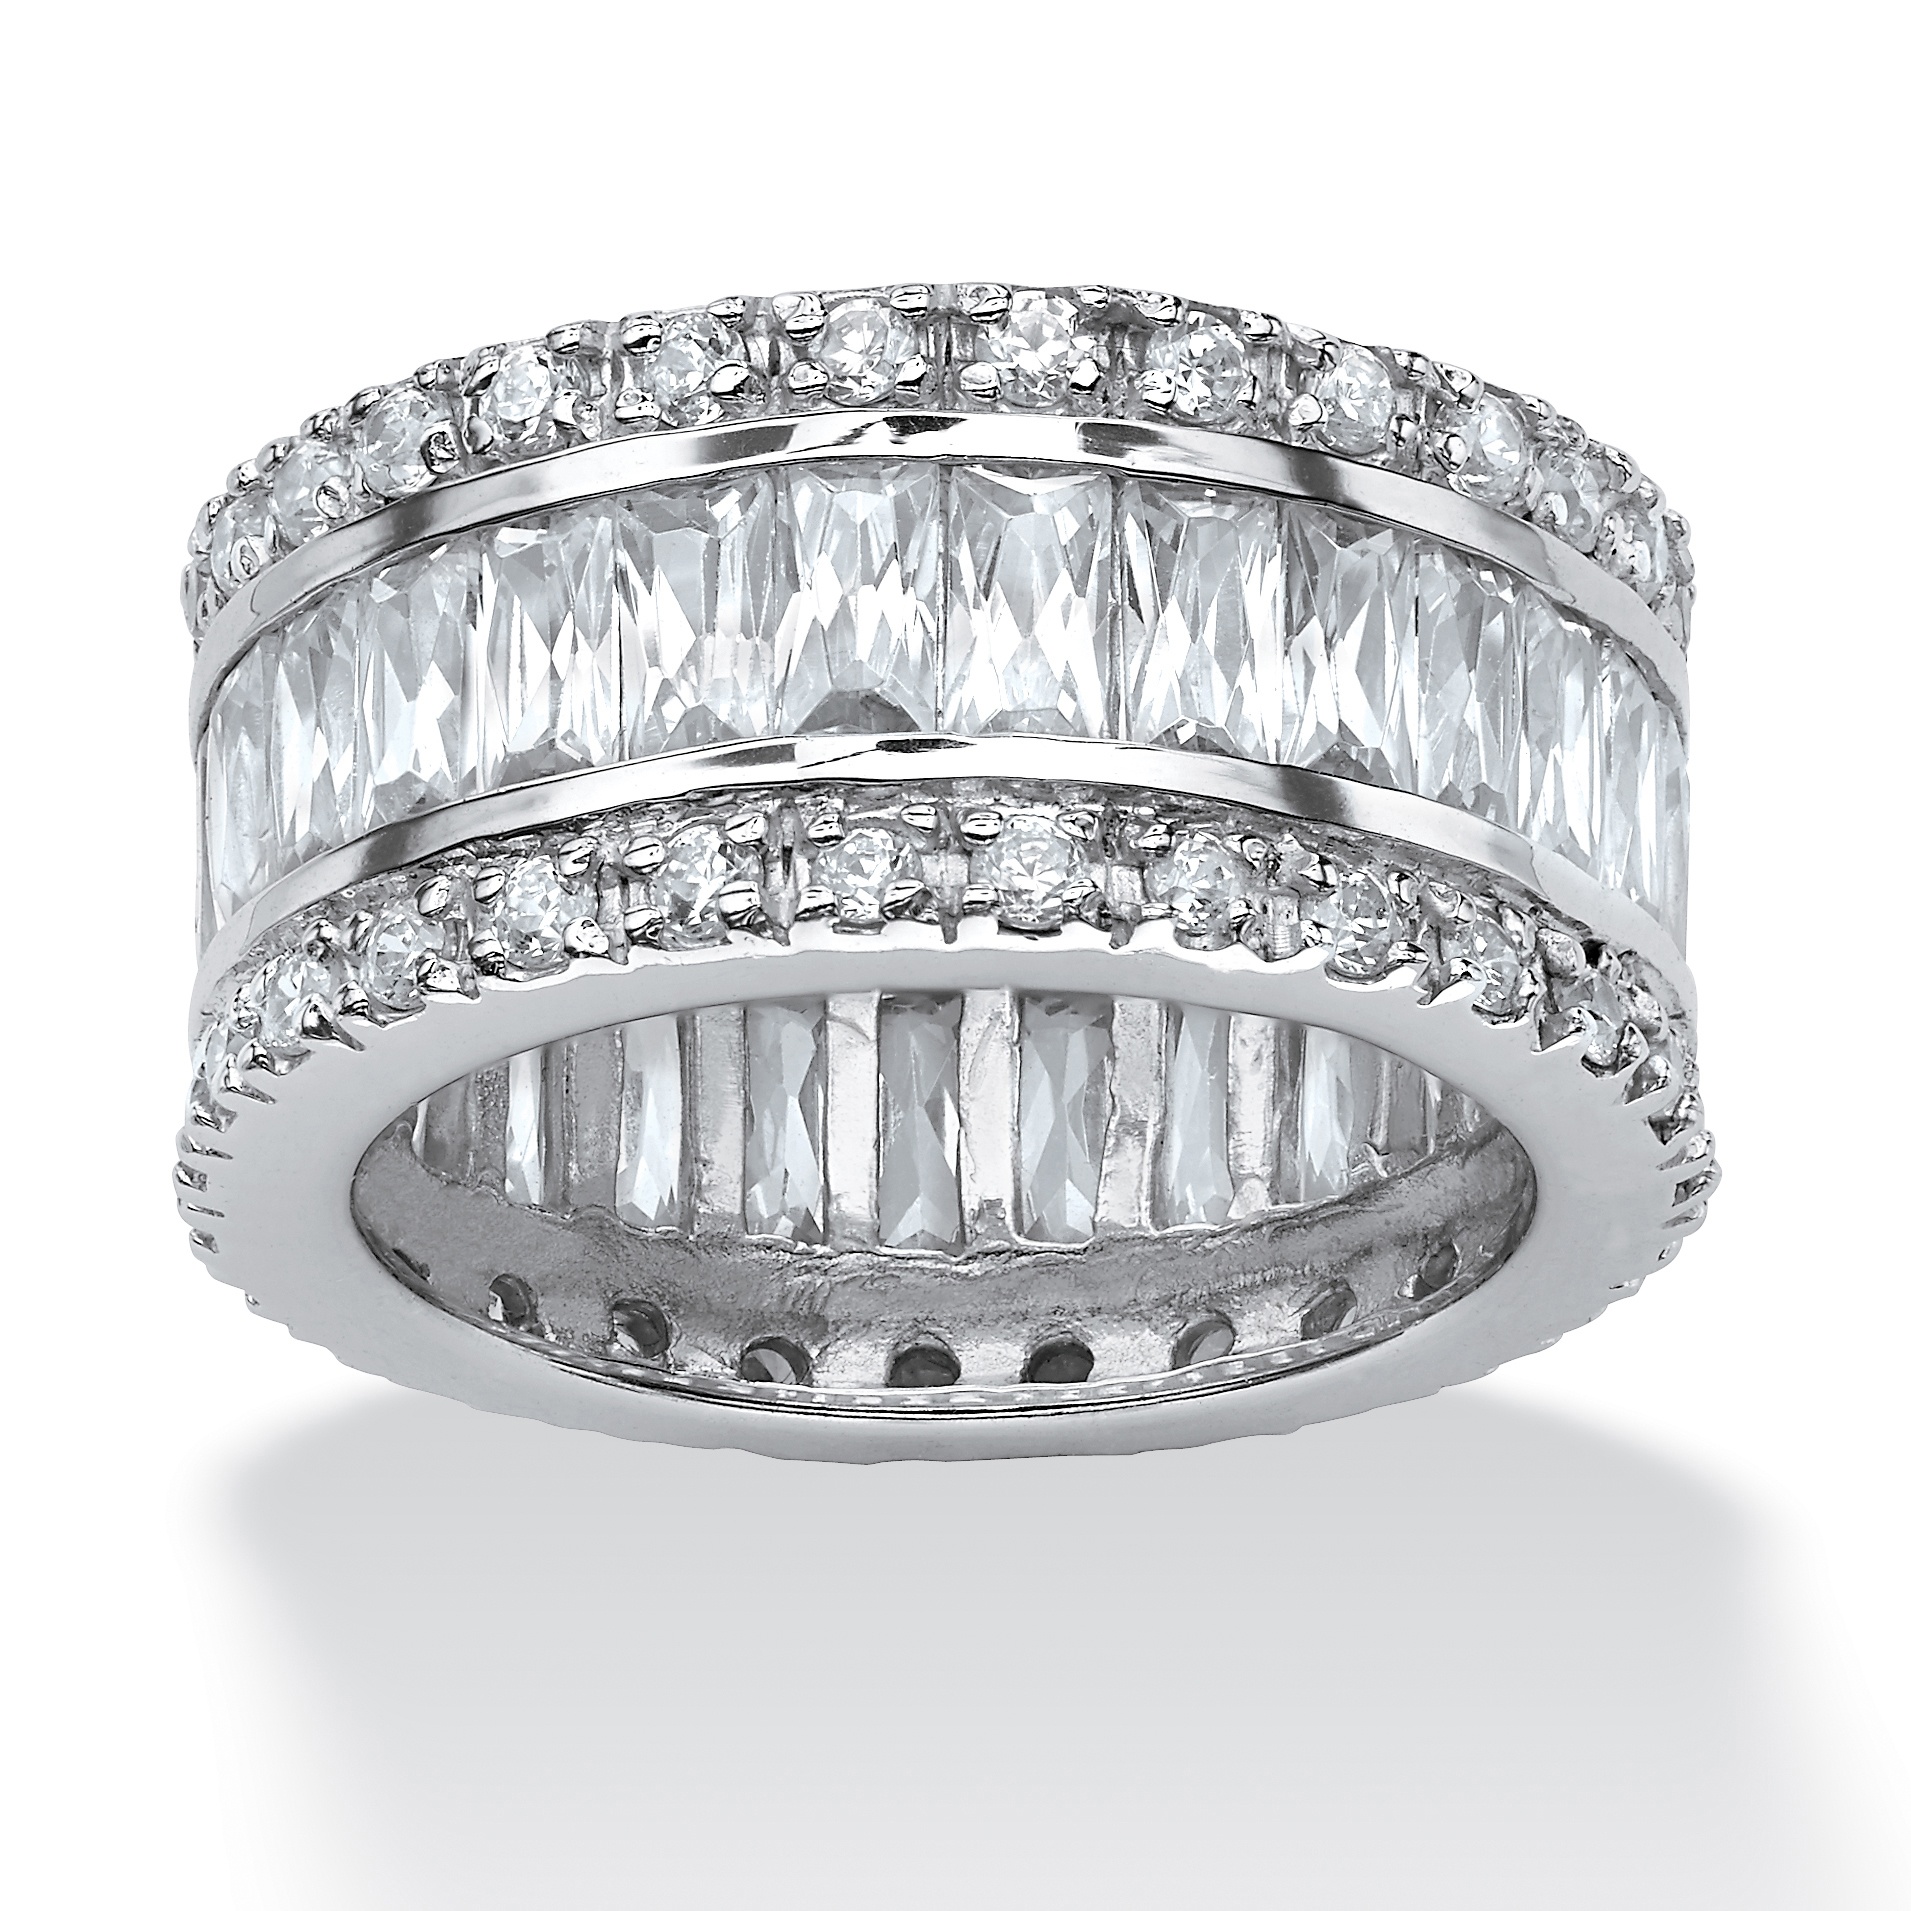 PalmBeach Jewelry 9.34 TCW Round and Emerald-Cut Cubic Zirconia Eternity Band Ring Platinum-Plated